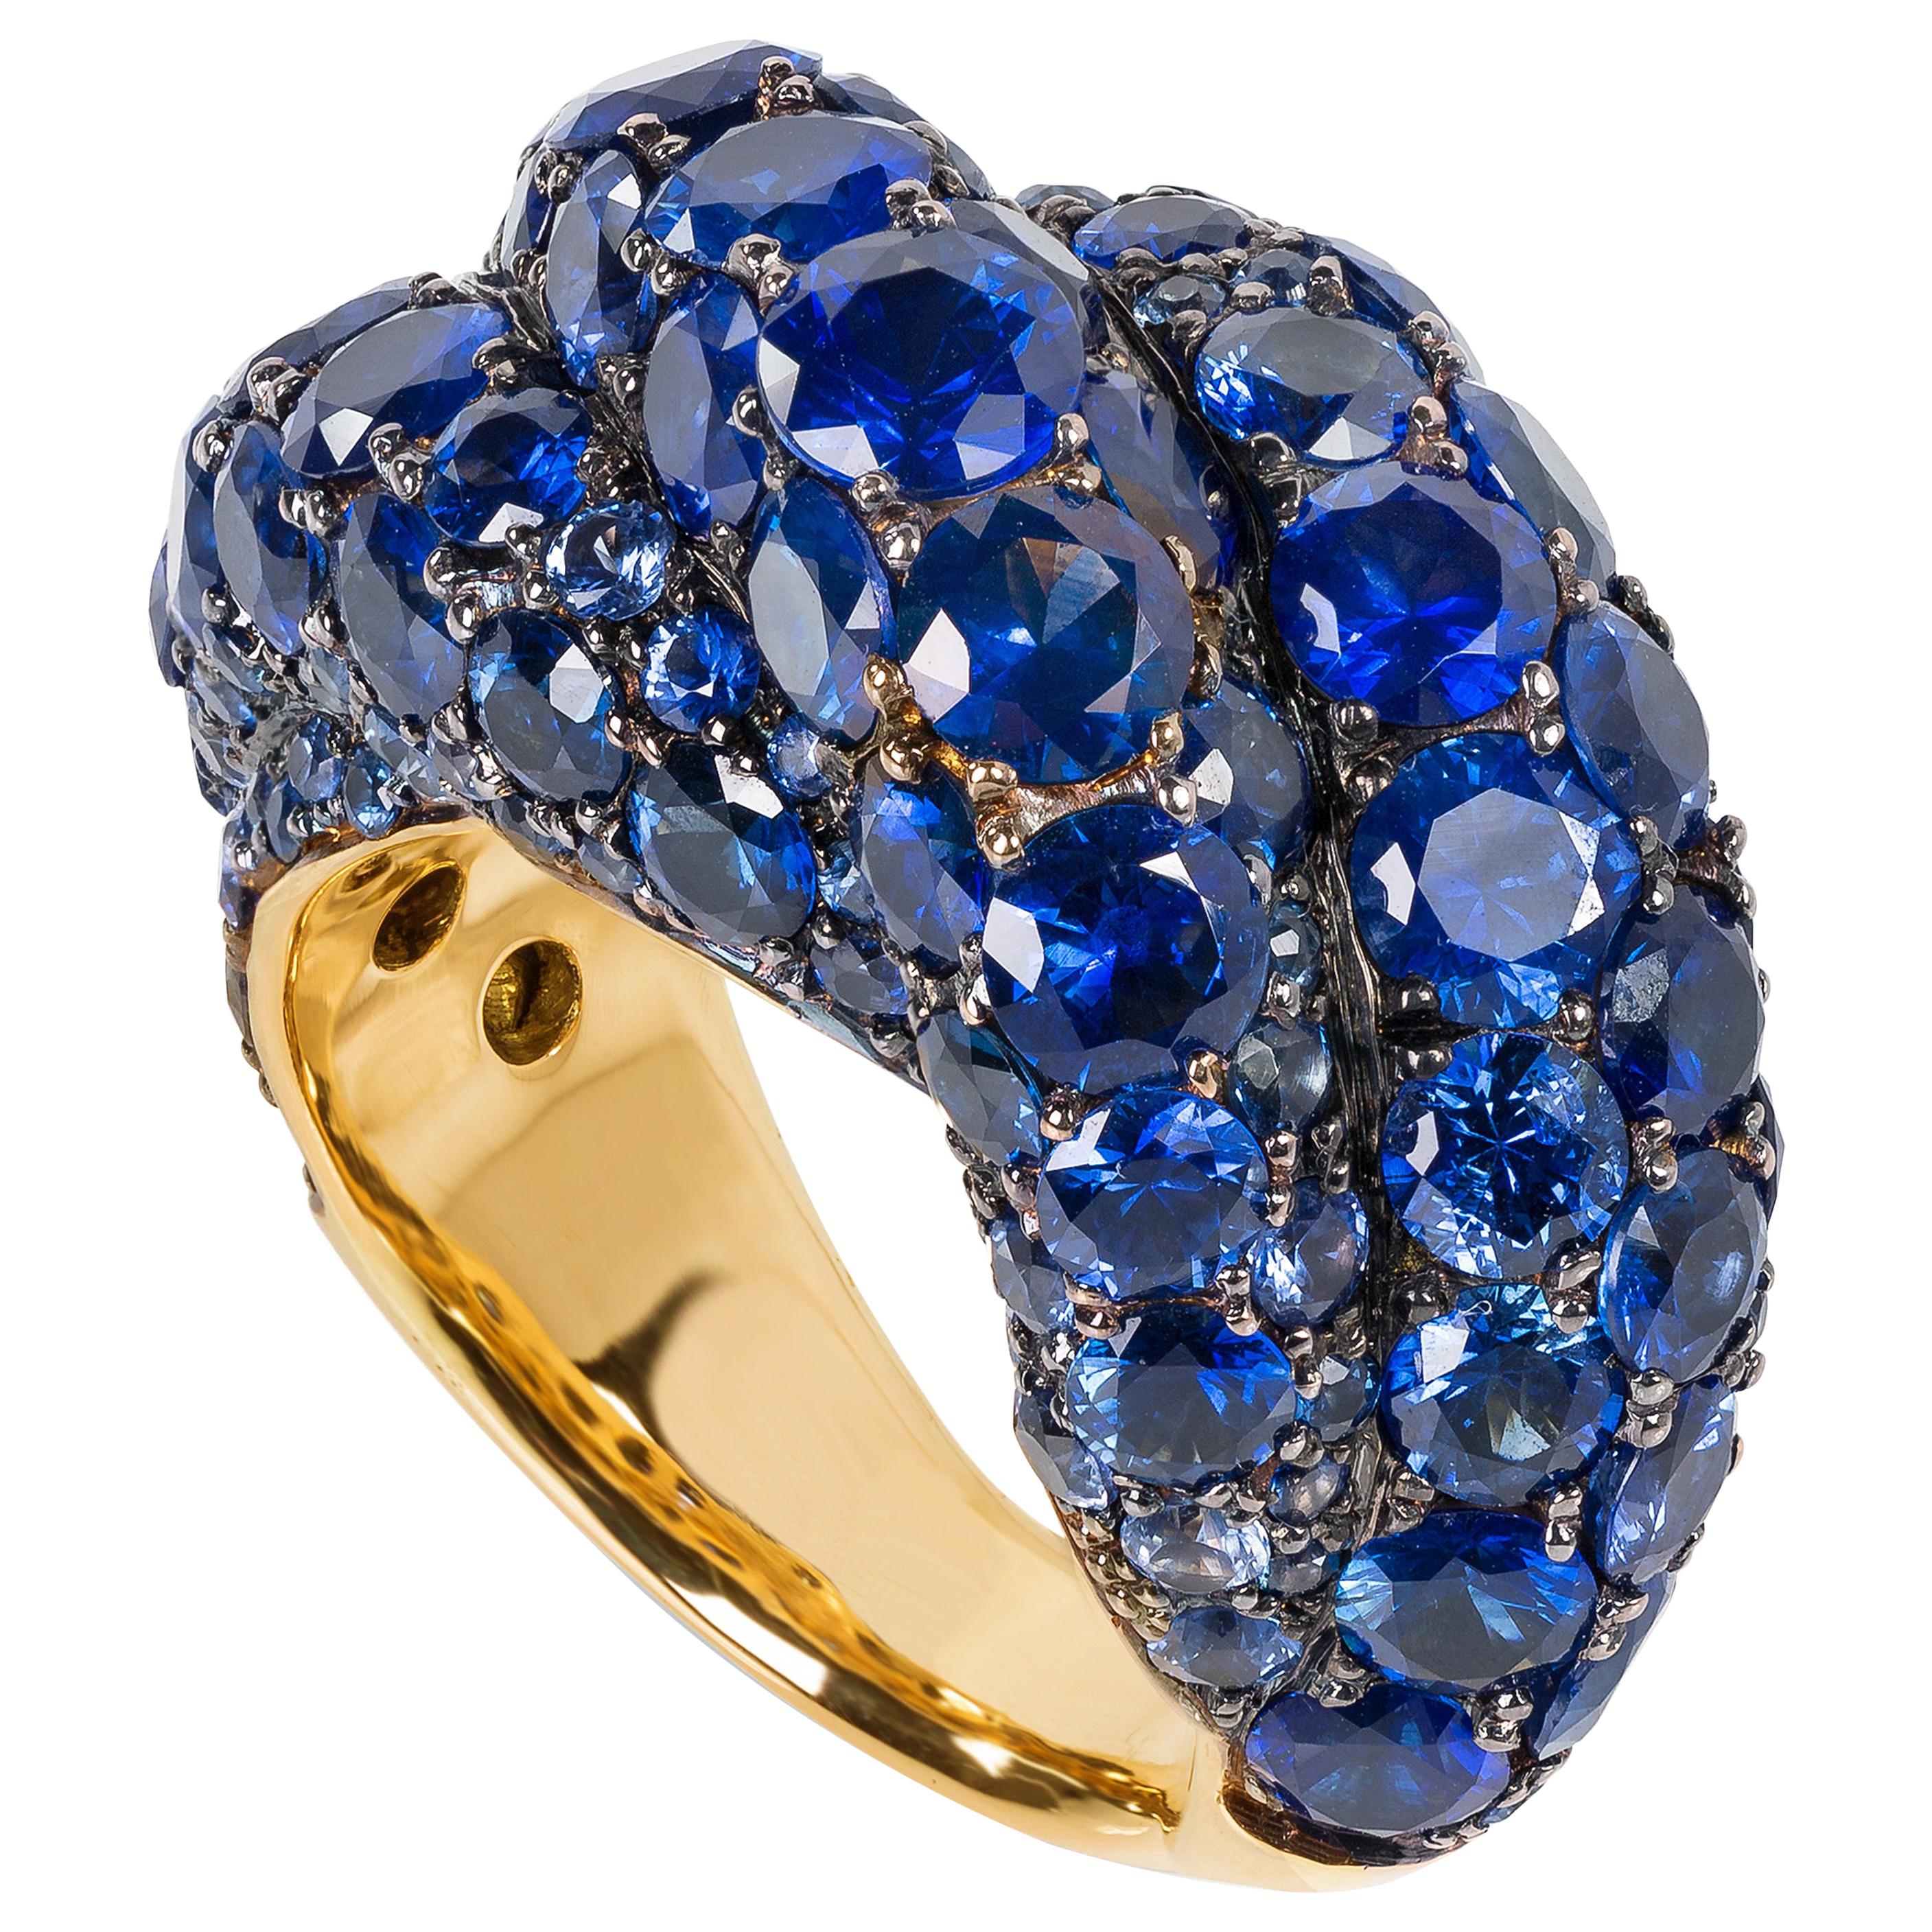 Rosior one-off "Royal Blue" Sapphire Cocktail Ring set in Yellow Gold